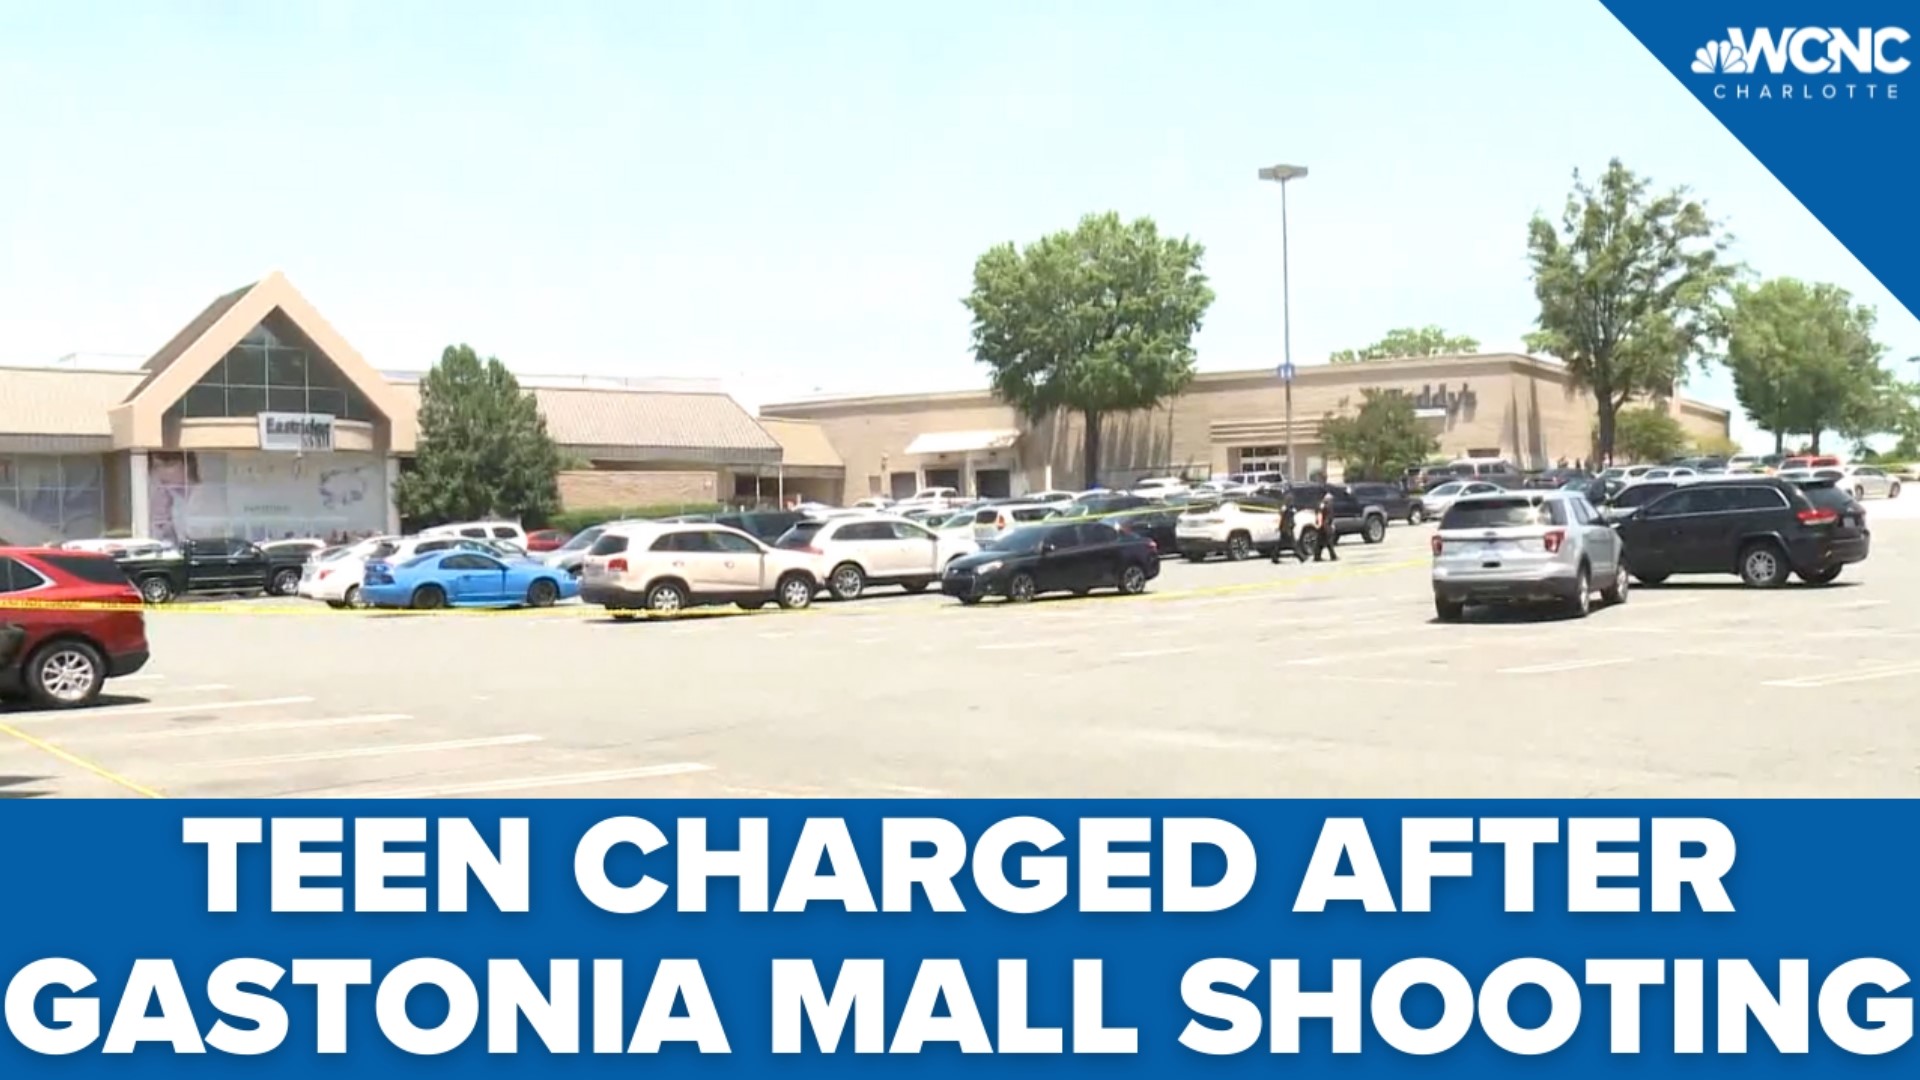 Three people were hurt in a shooting at the Eastridge Mall in Gastonia on Friday afternoon, and police said a 17-year-old is now facing multiple charges for it.